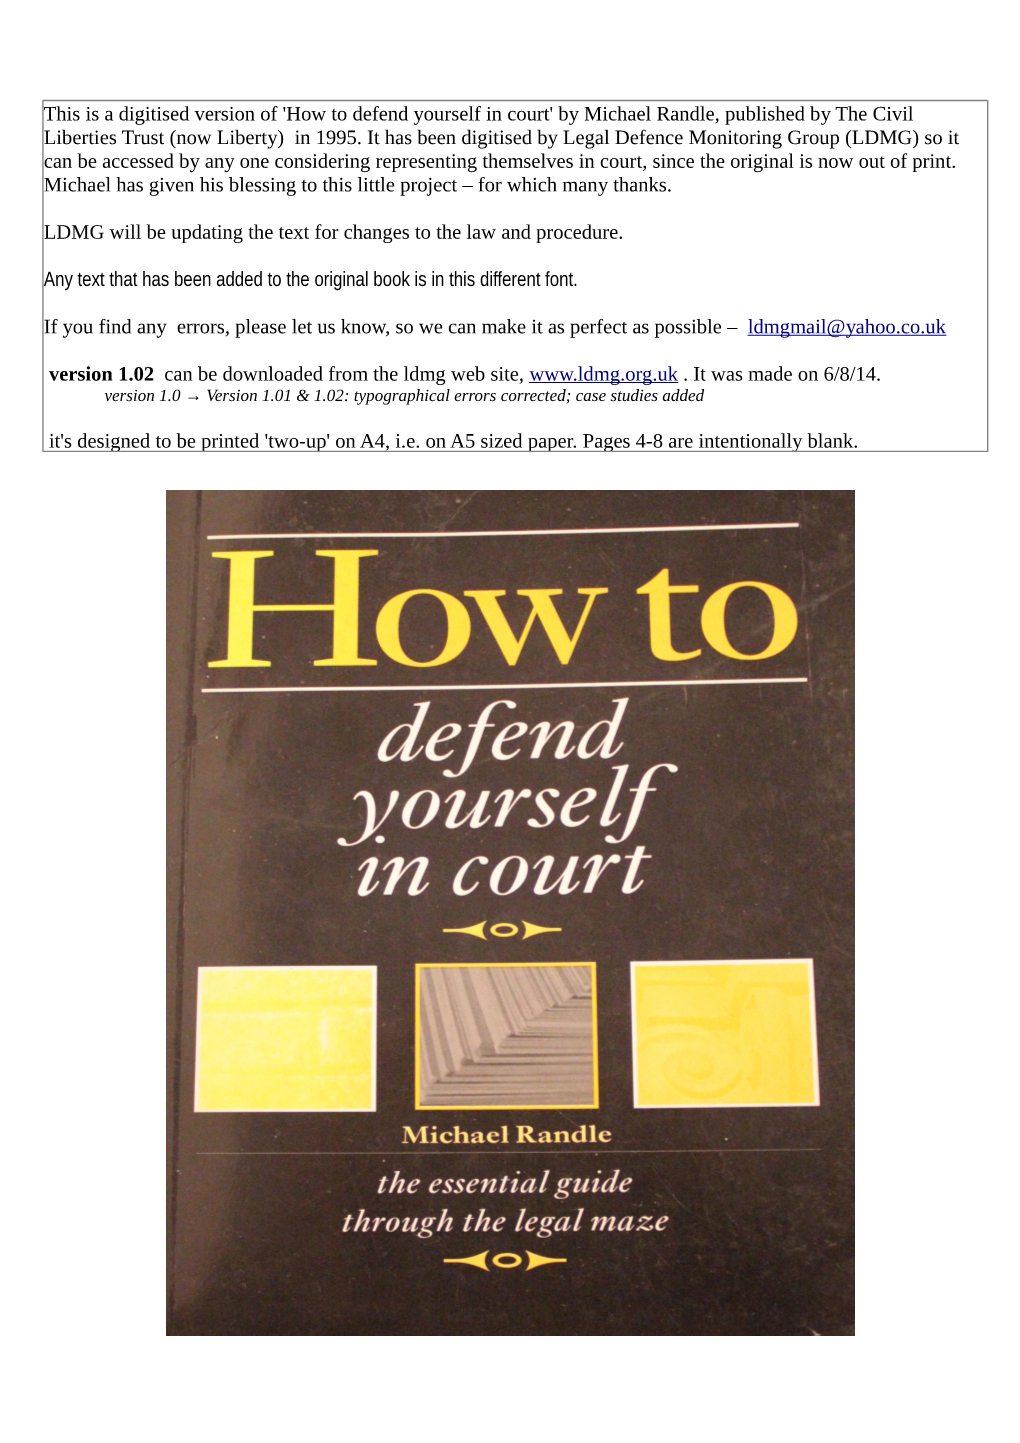 How to Defend Yourself in Court' by Michael Randle, Published by the Civil Liberties Trust (Now Liberty) in 1995